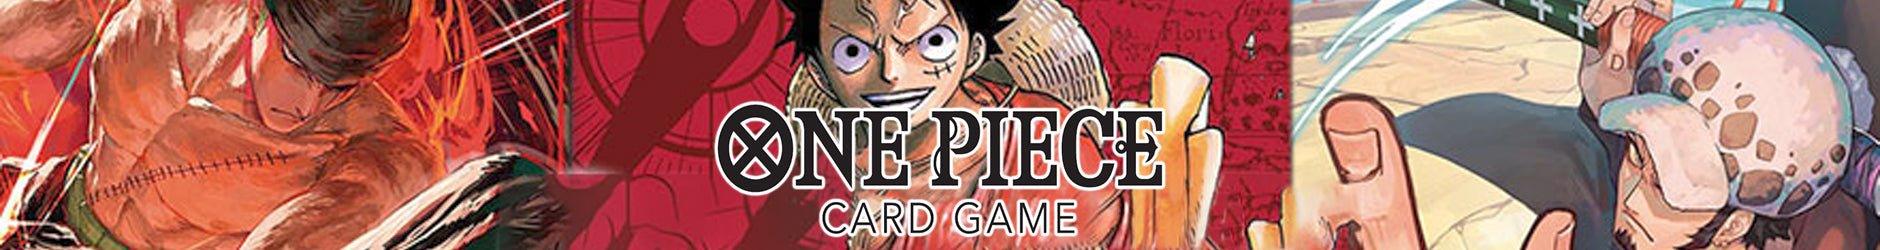 One Piece Best Sellers - Romulus Games